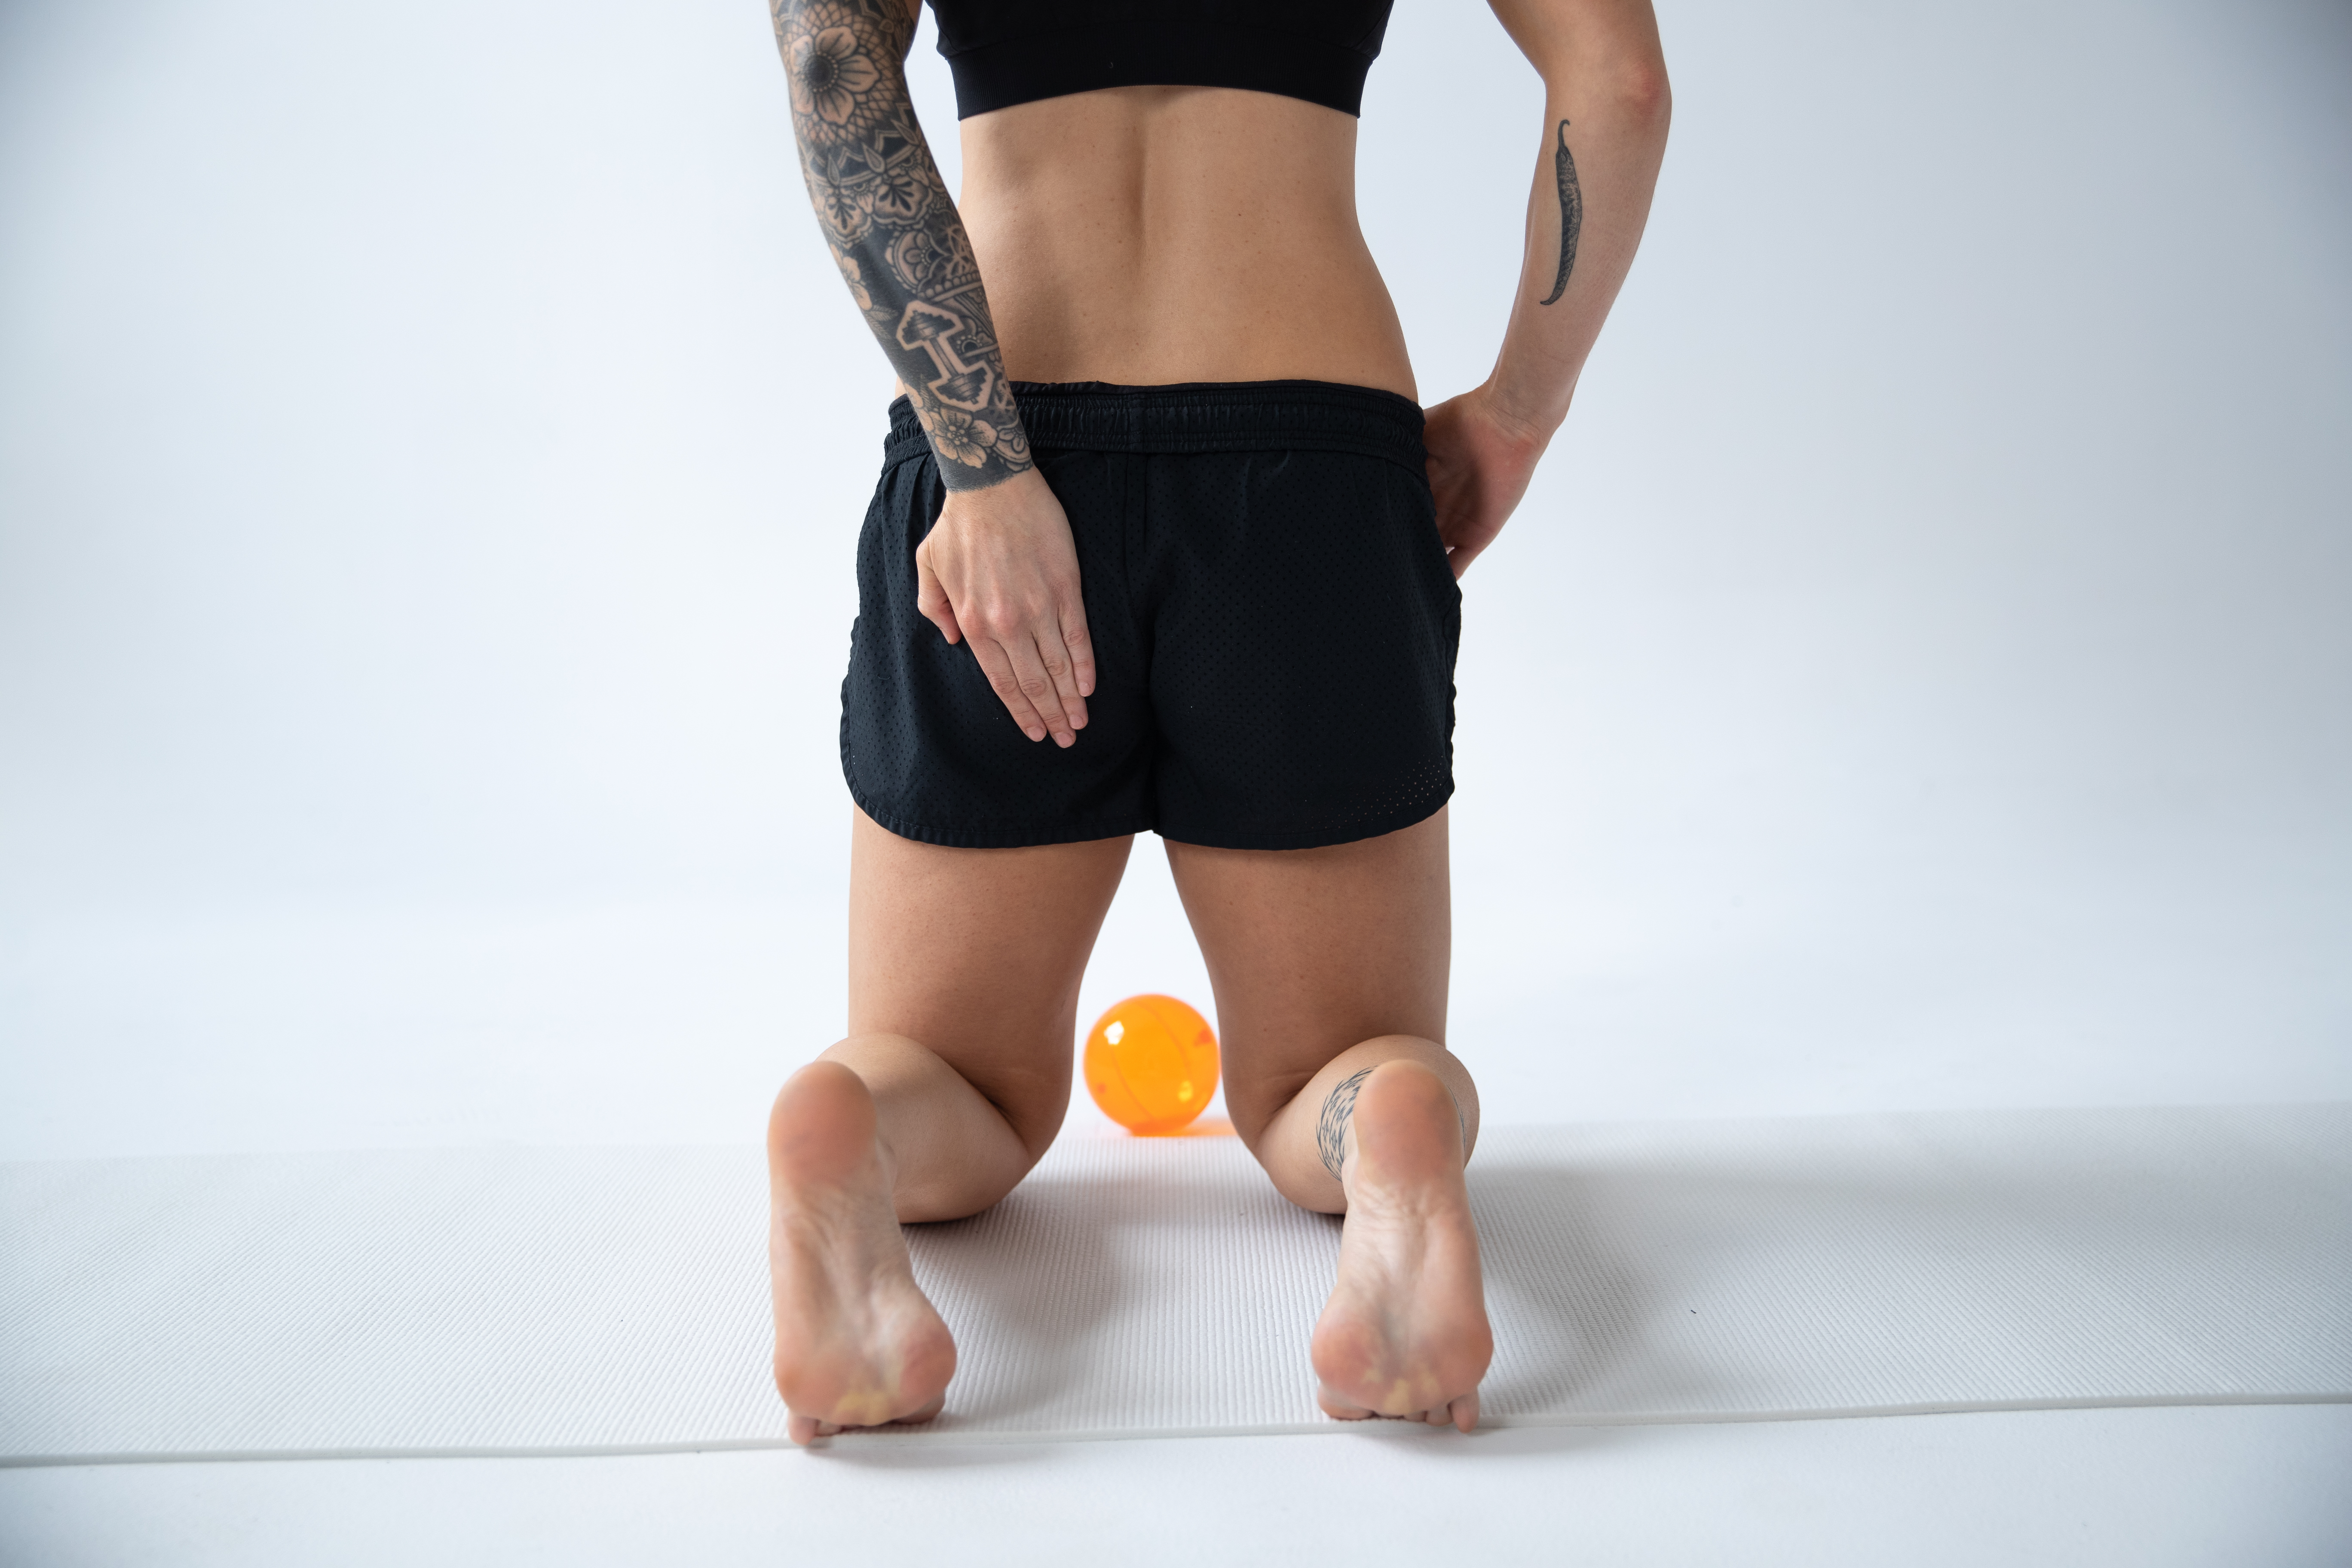 Using the Hip Release Ball on the glute